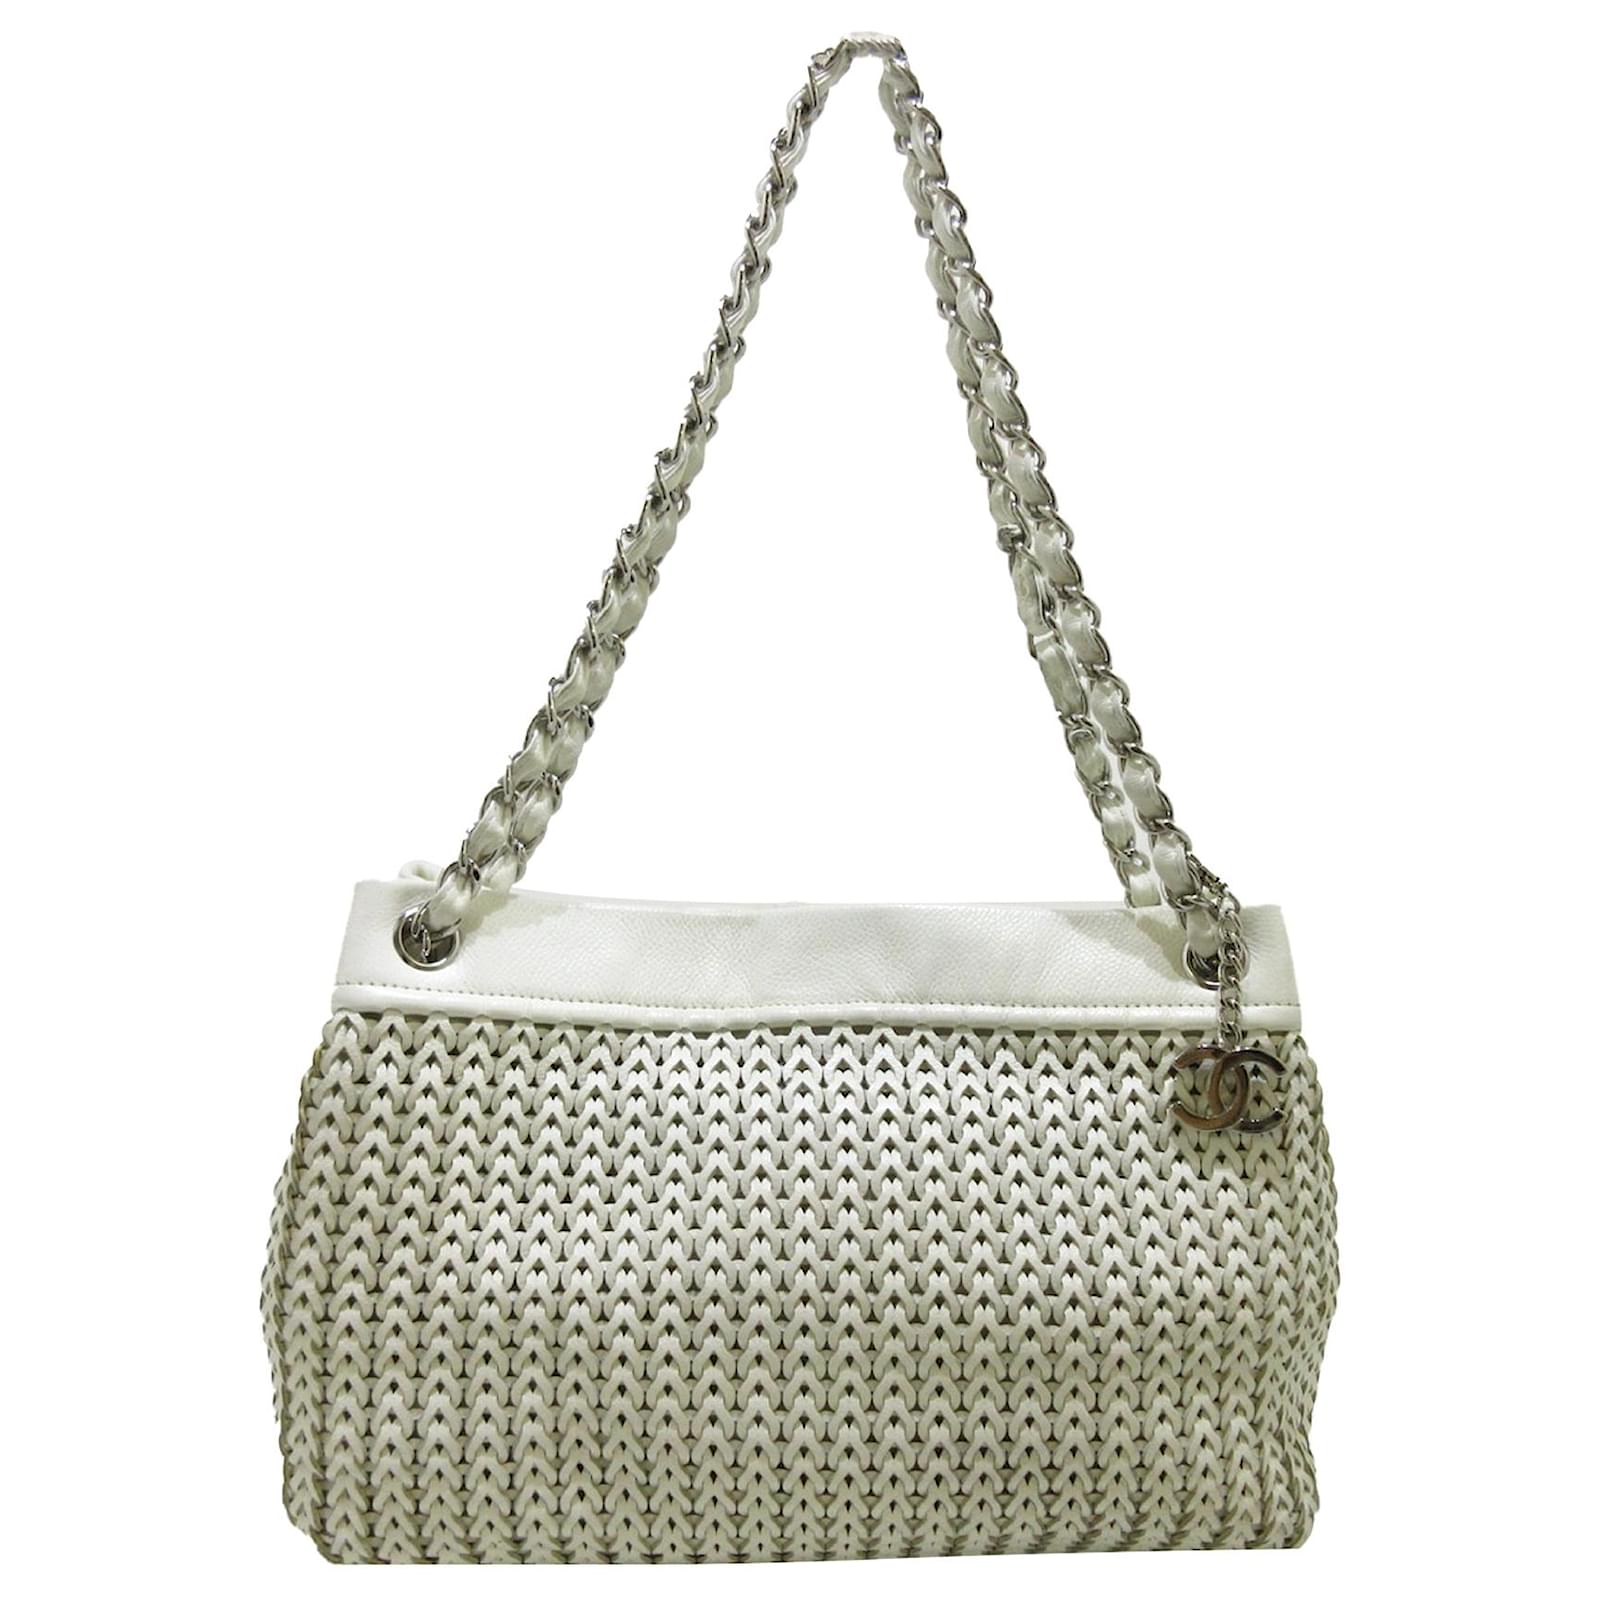 Chanel White Woven Caviar Leather Shoulder Bag